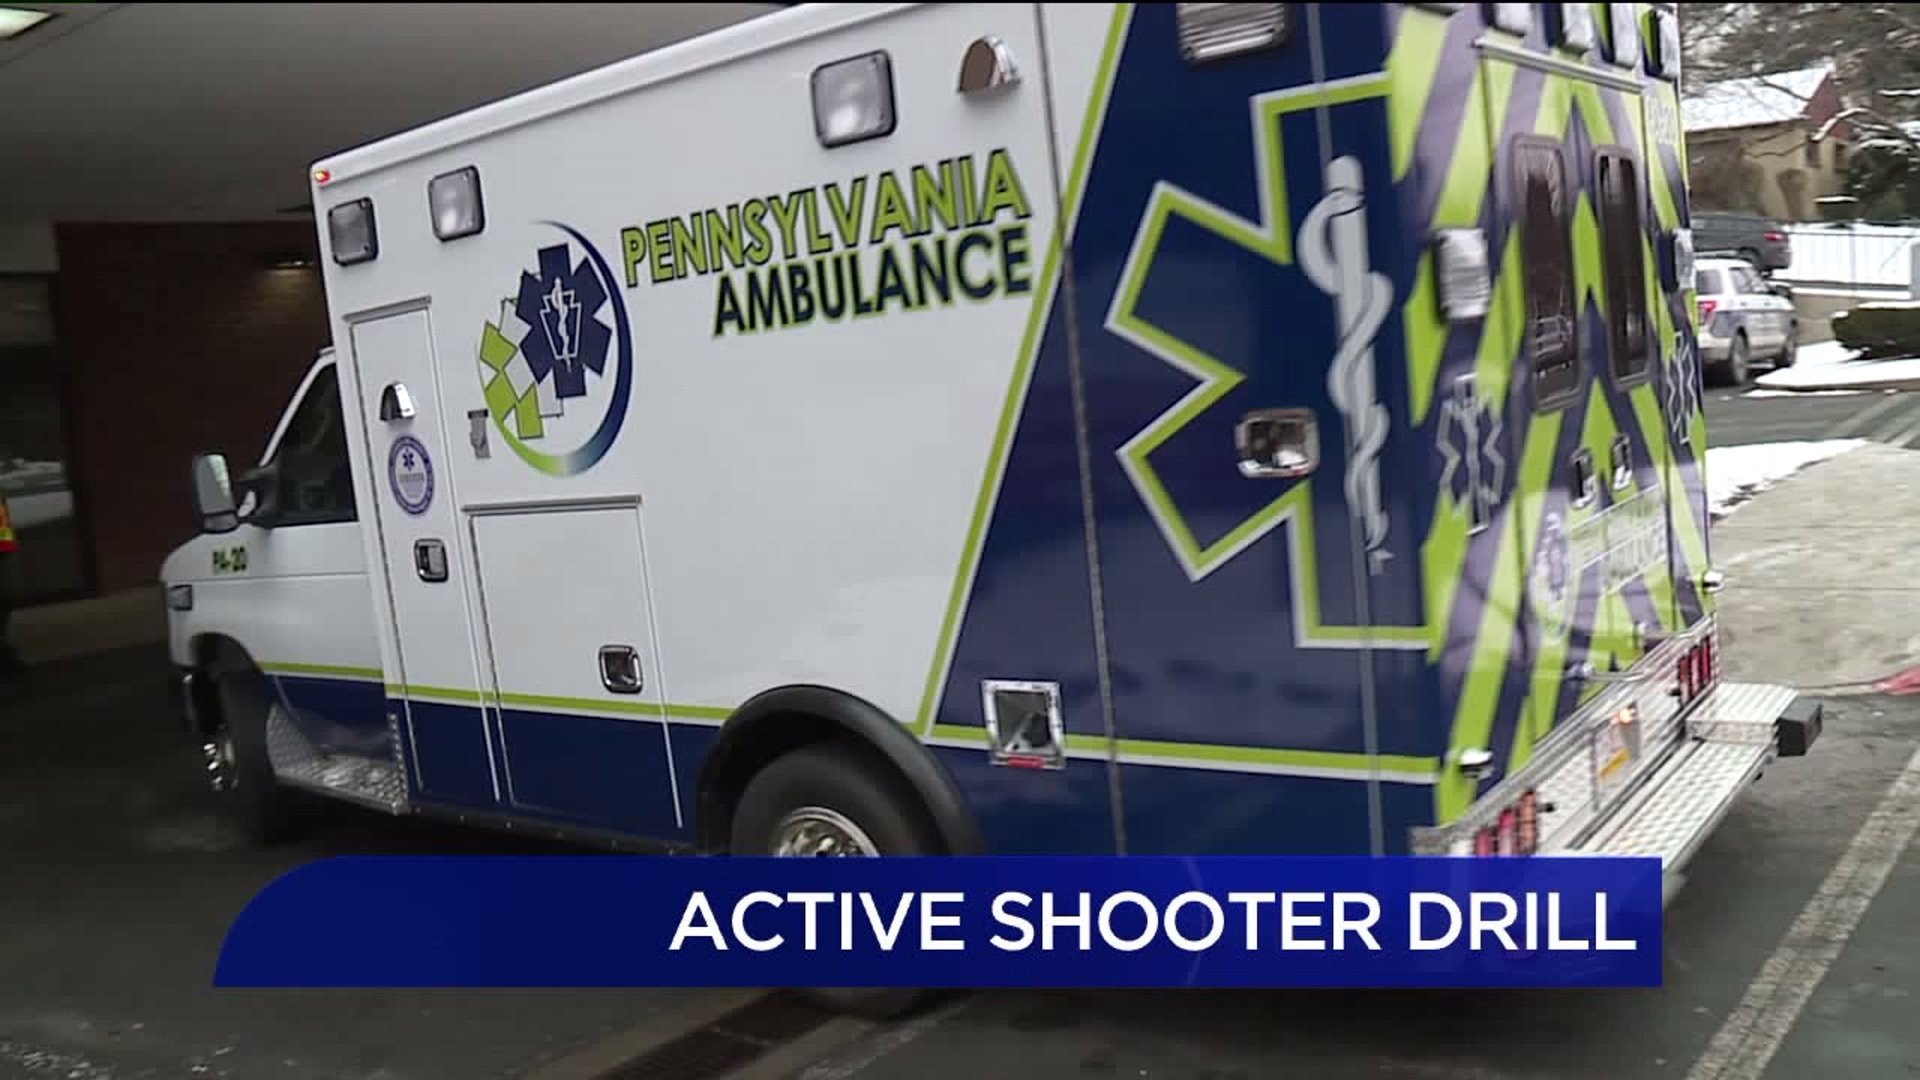 Commonwealth Health Holds Active Shooter Drill At Two Hospitals To Train Staff